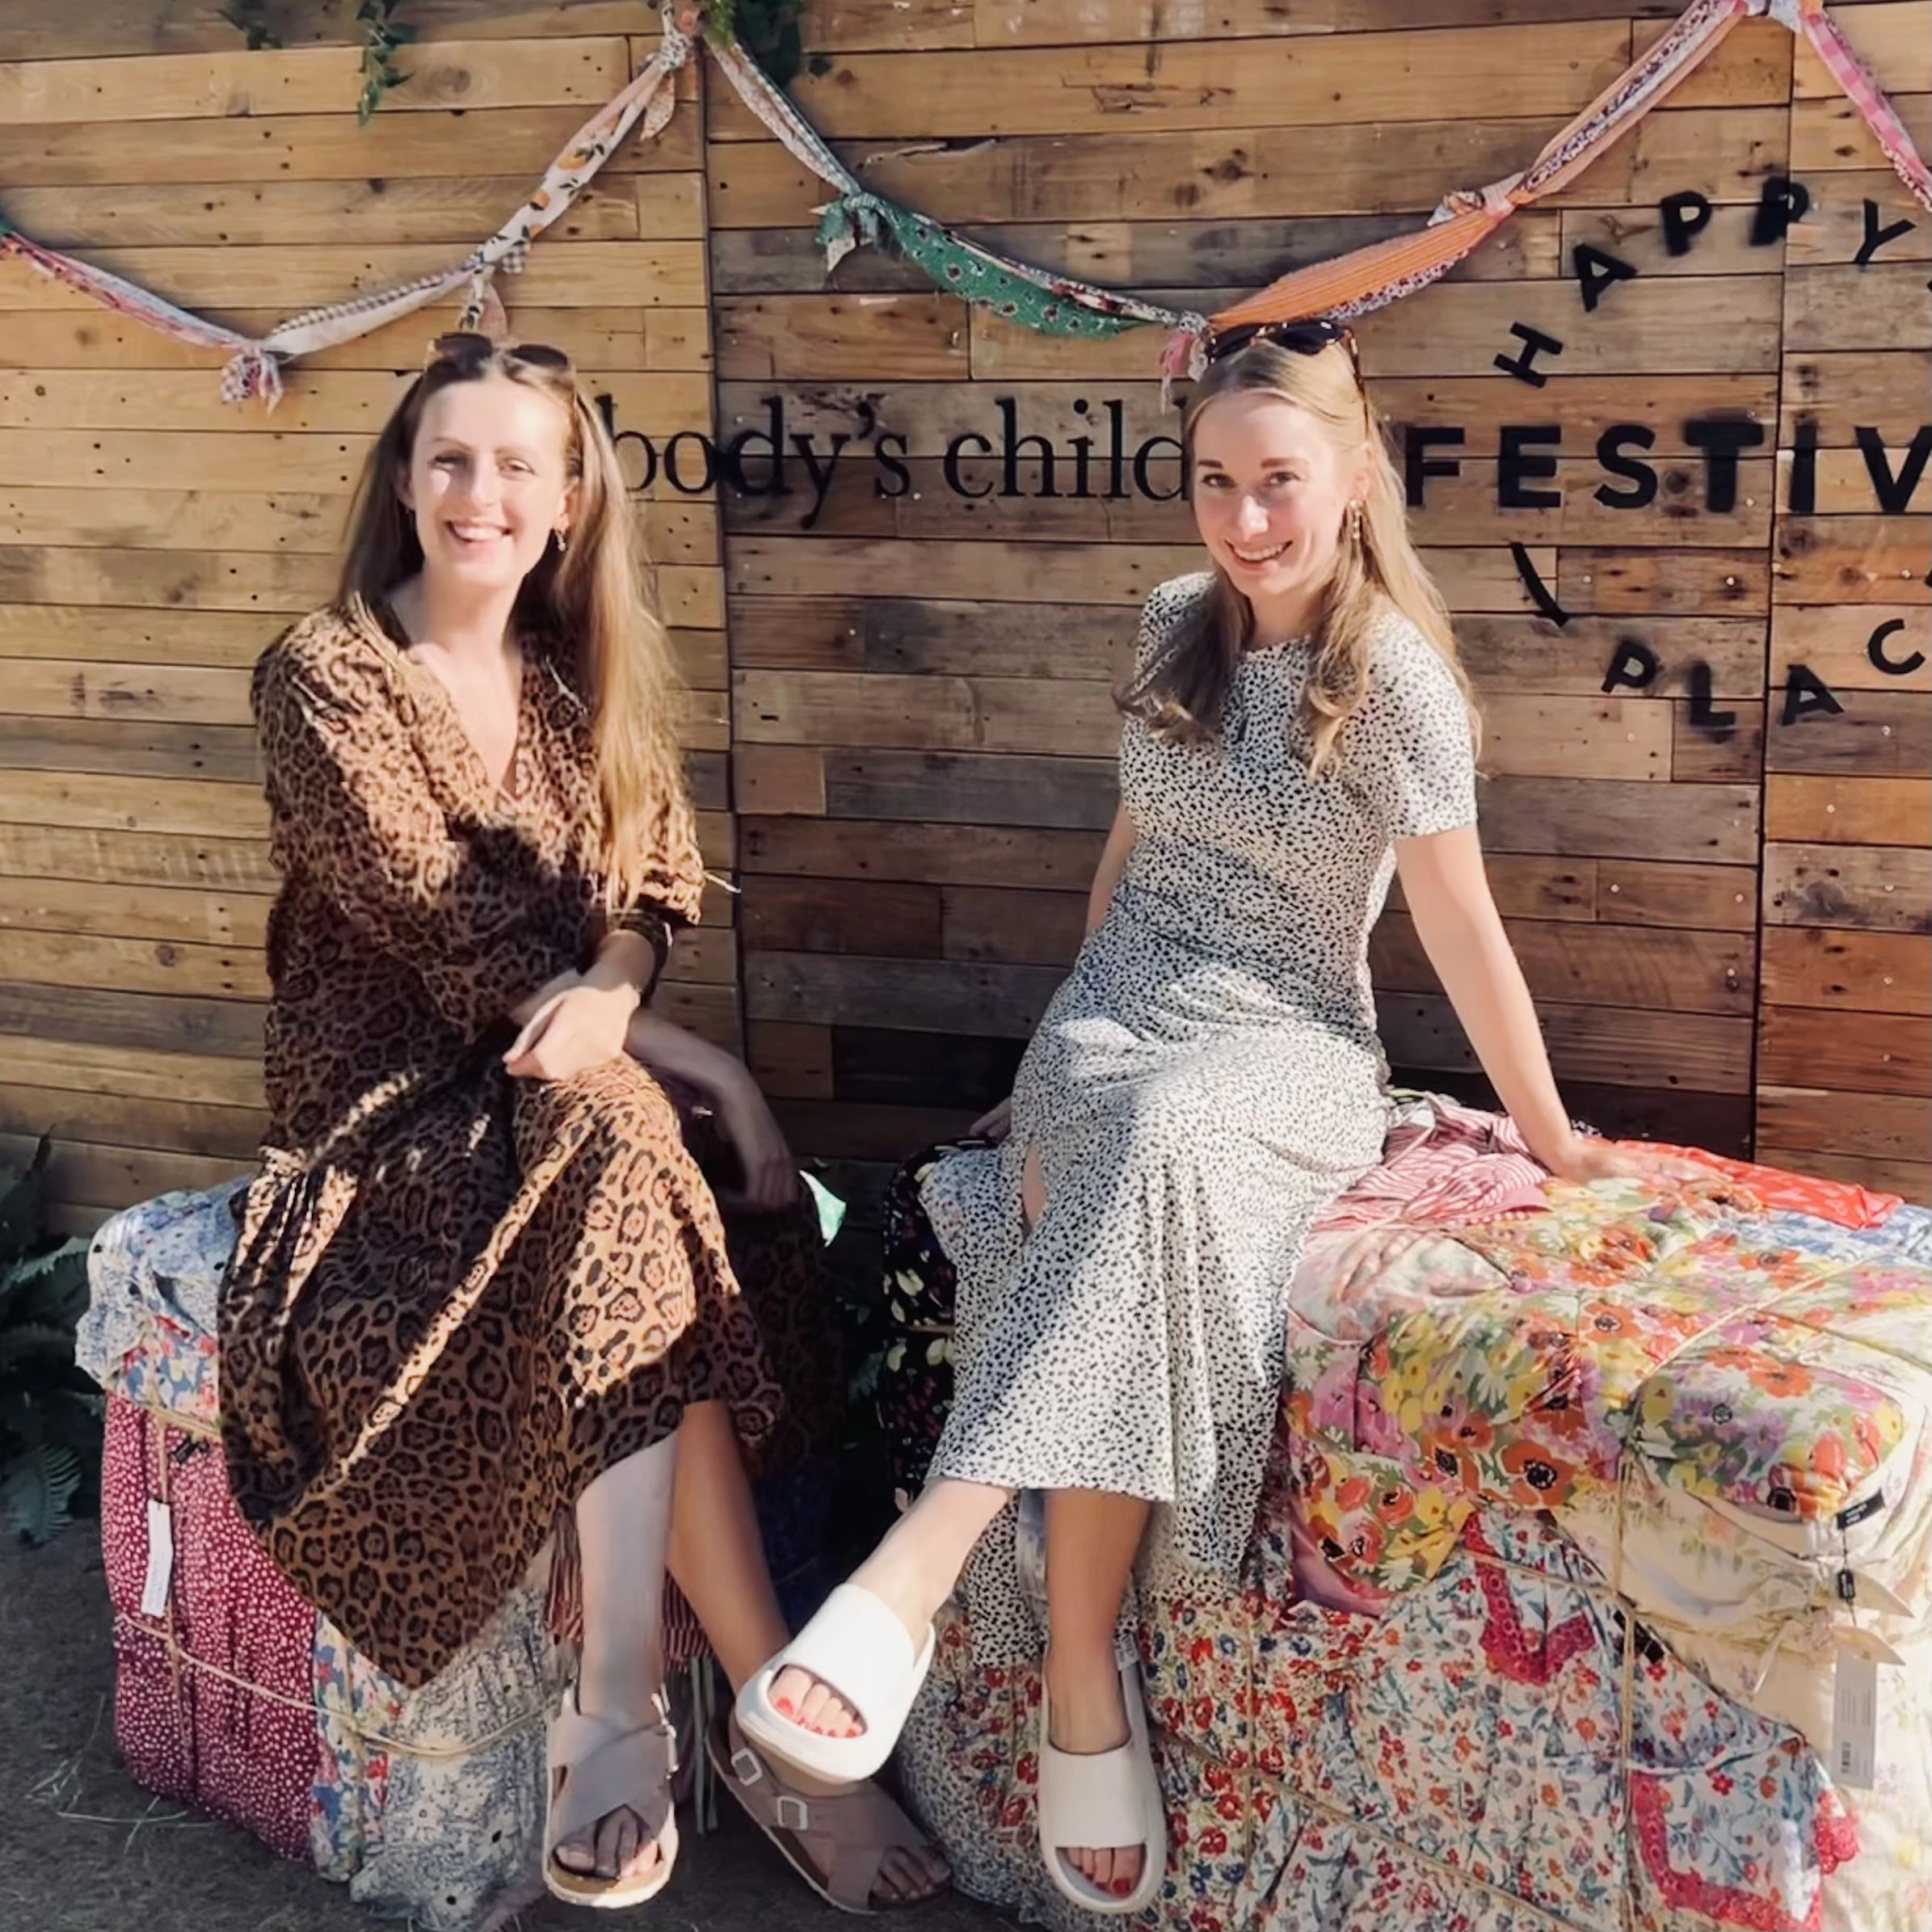 2 women sat on bales of hay covered in fabric, wearing long summer dresses